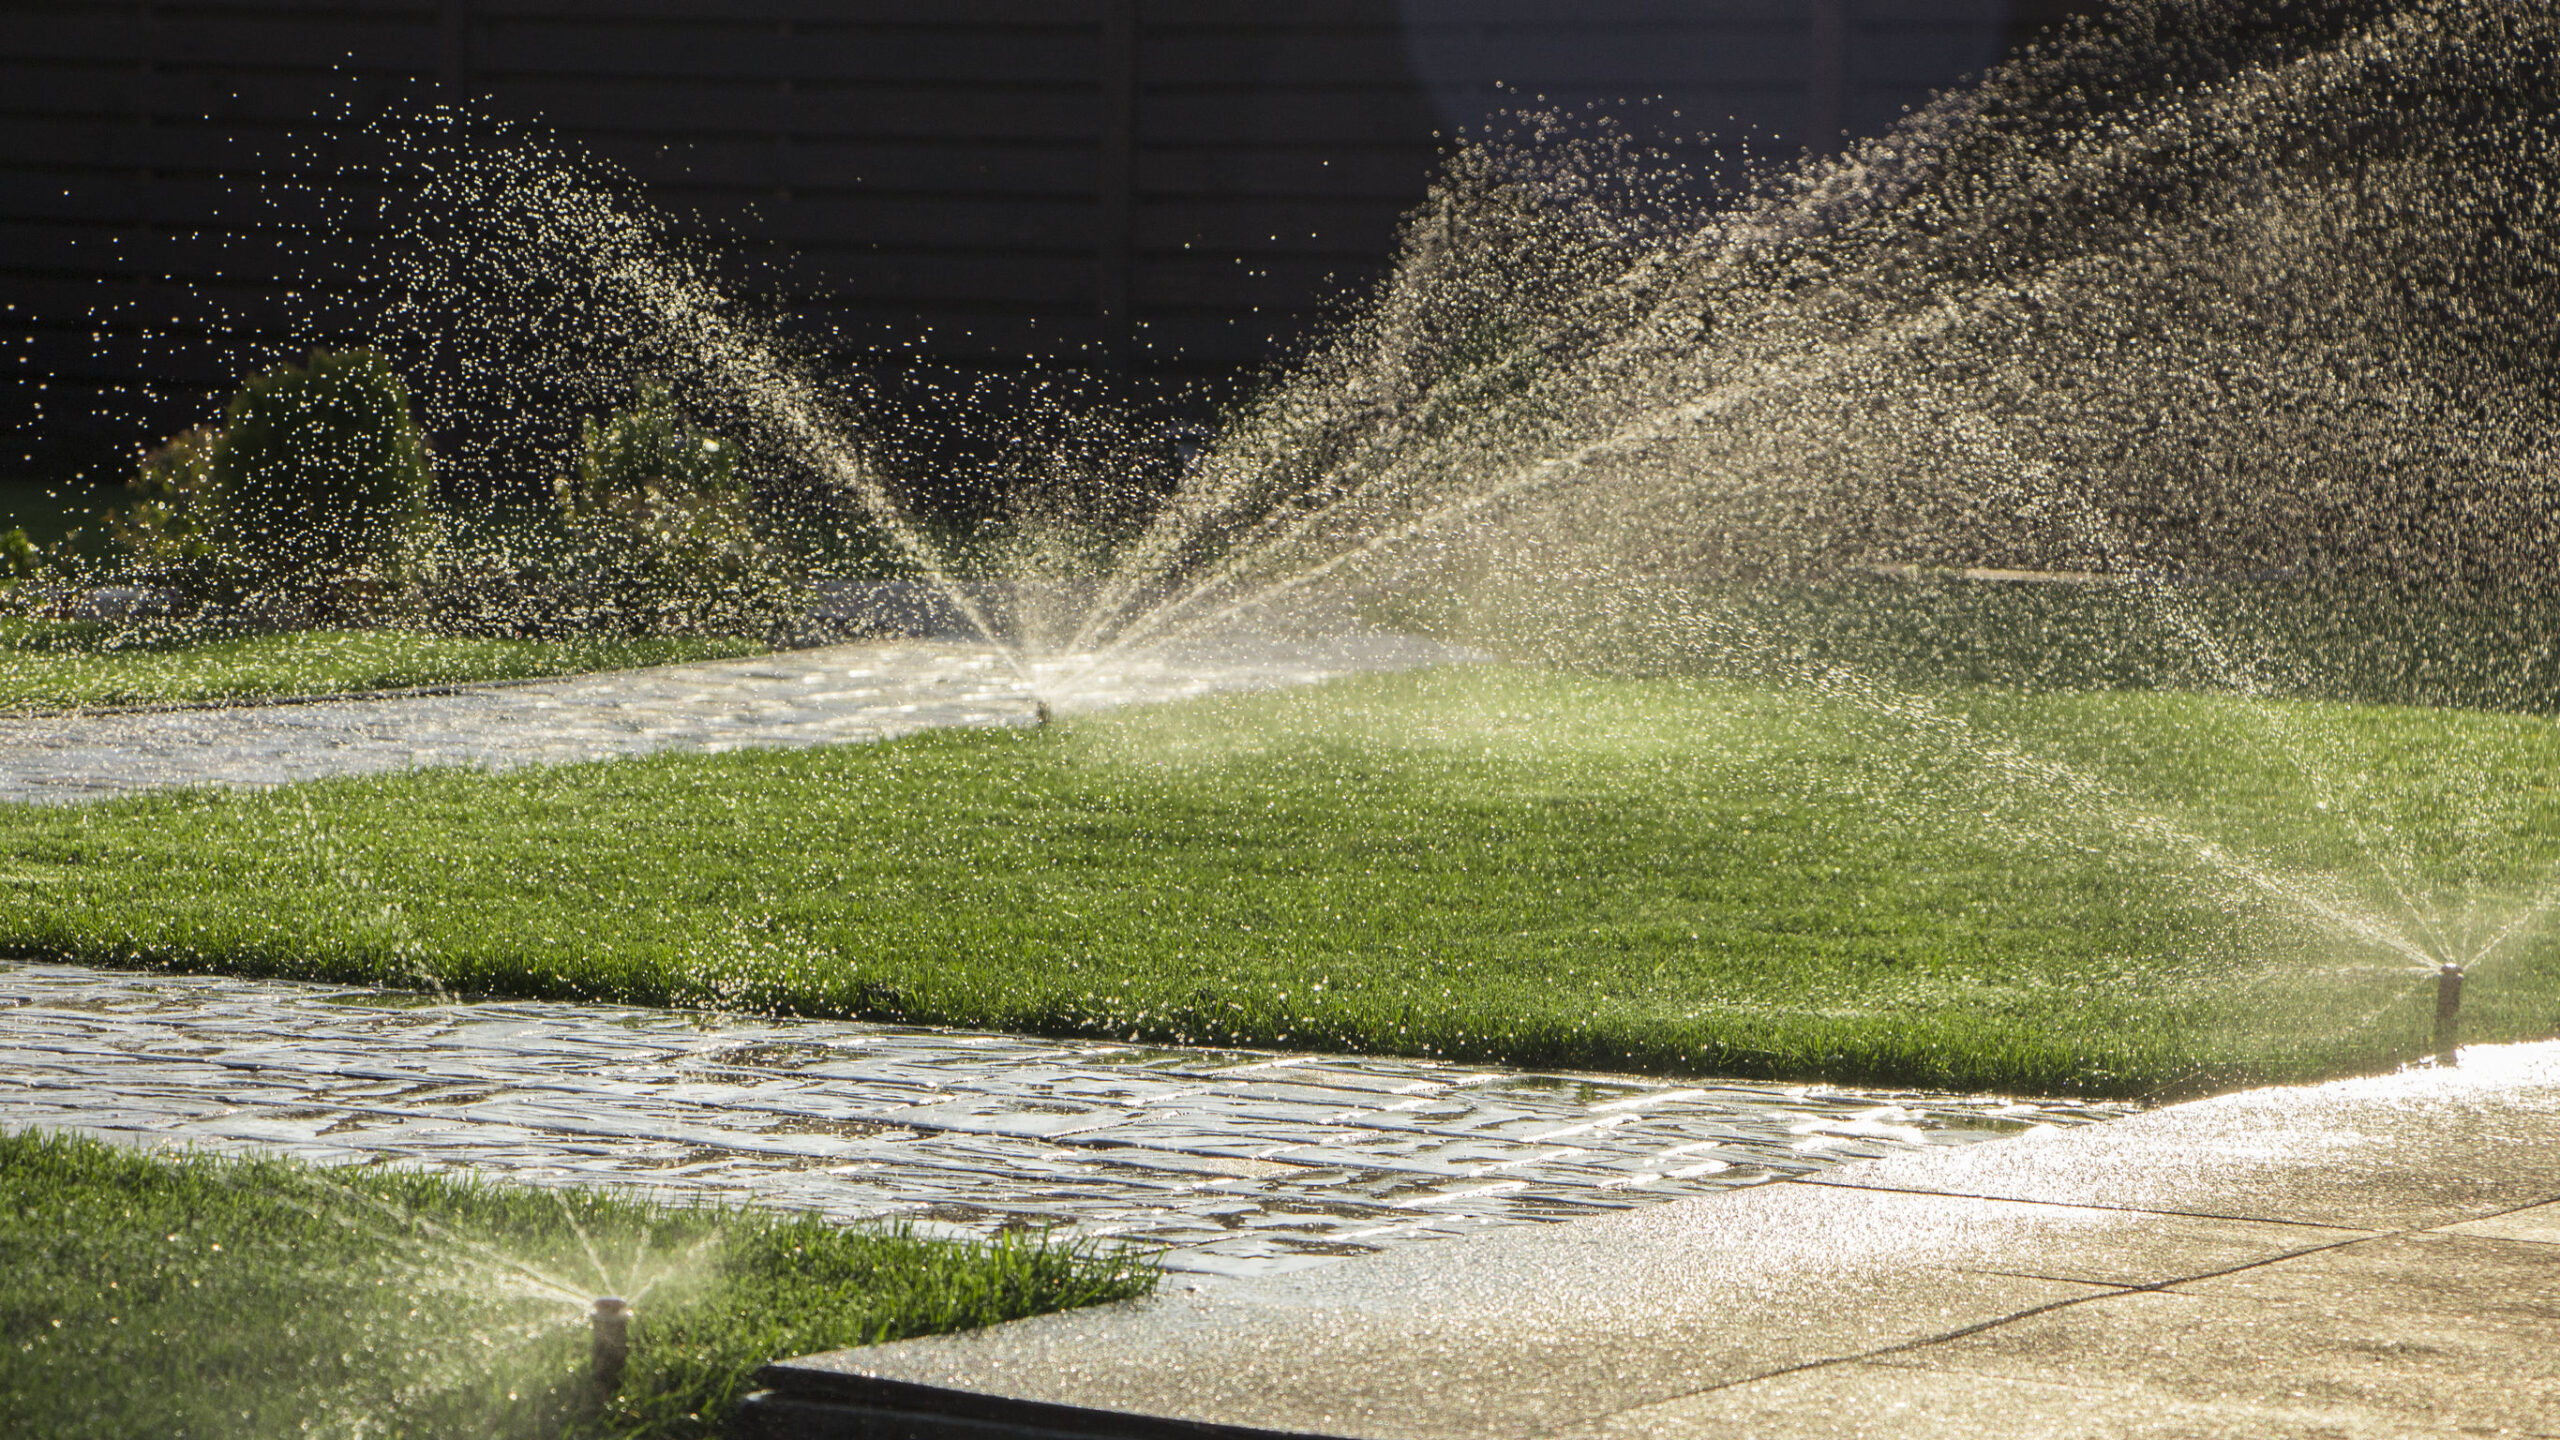 A rotating sprinkler spraying a water into the backyard.